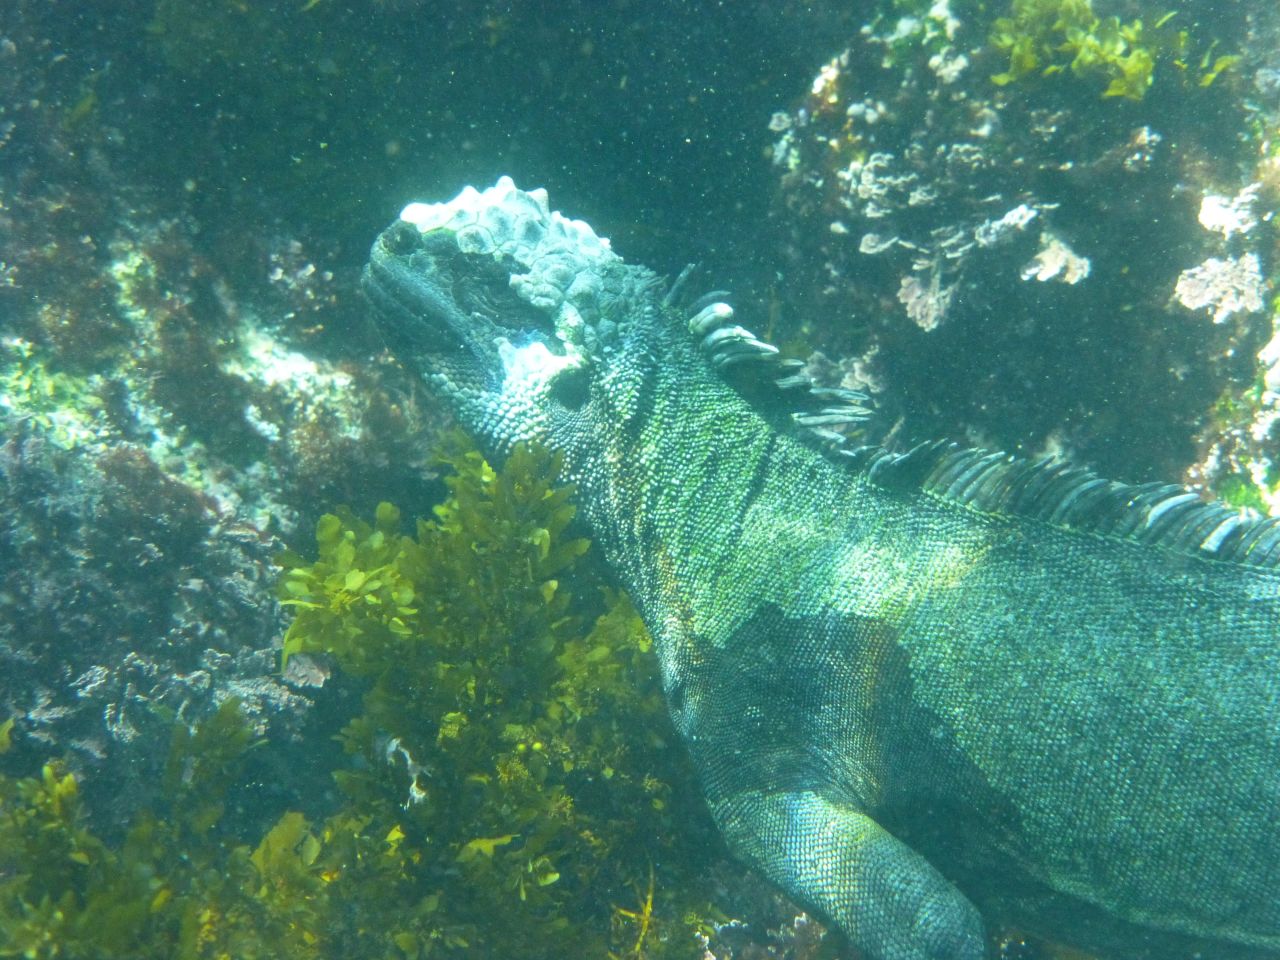 It's no secret that Ecuador's Galapagos Islands are one of the world's great wildlife destinations. And that's as true on land as it is in the water, where explorers may encounter creatures like this marine iguana.